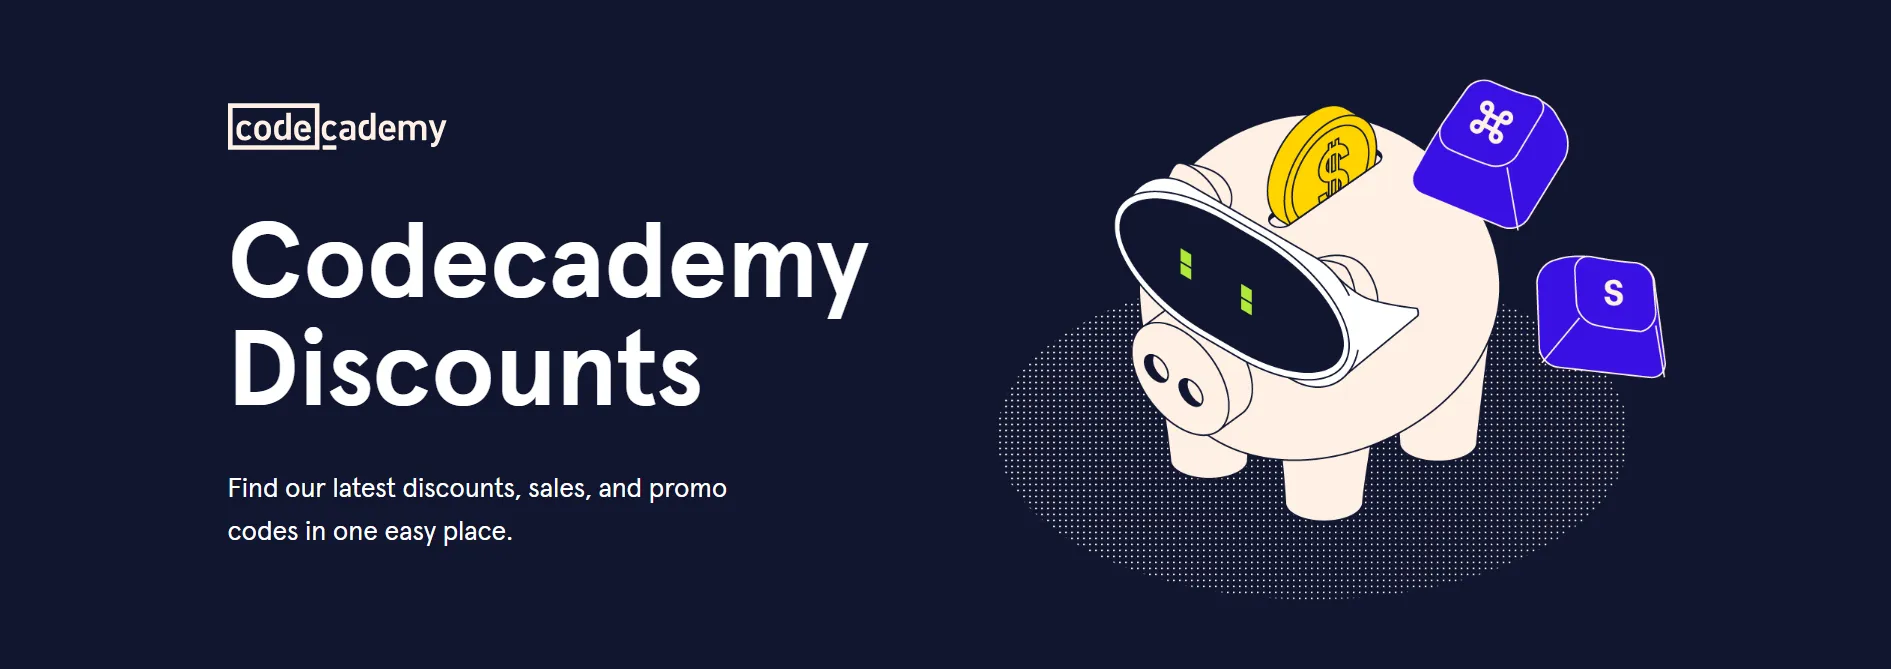 Codecademy landing page example